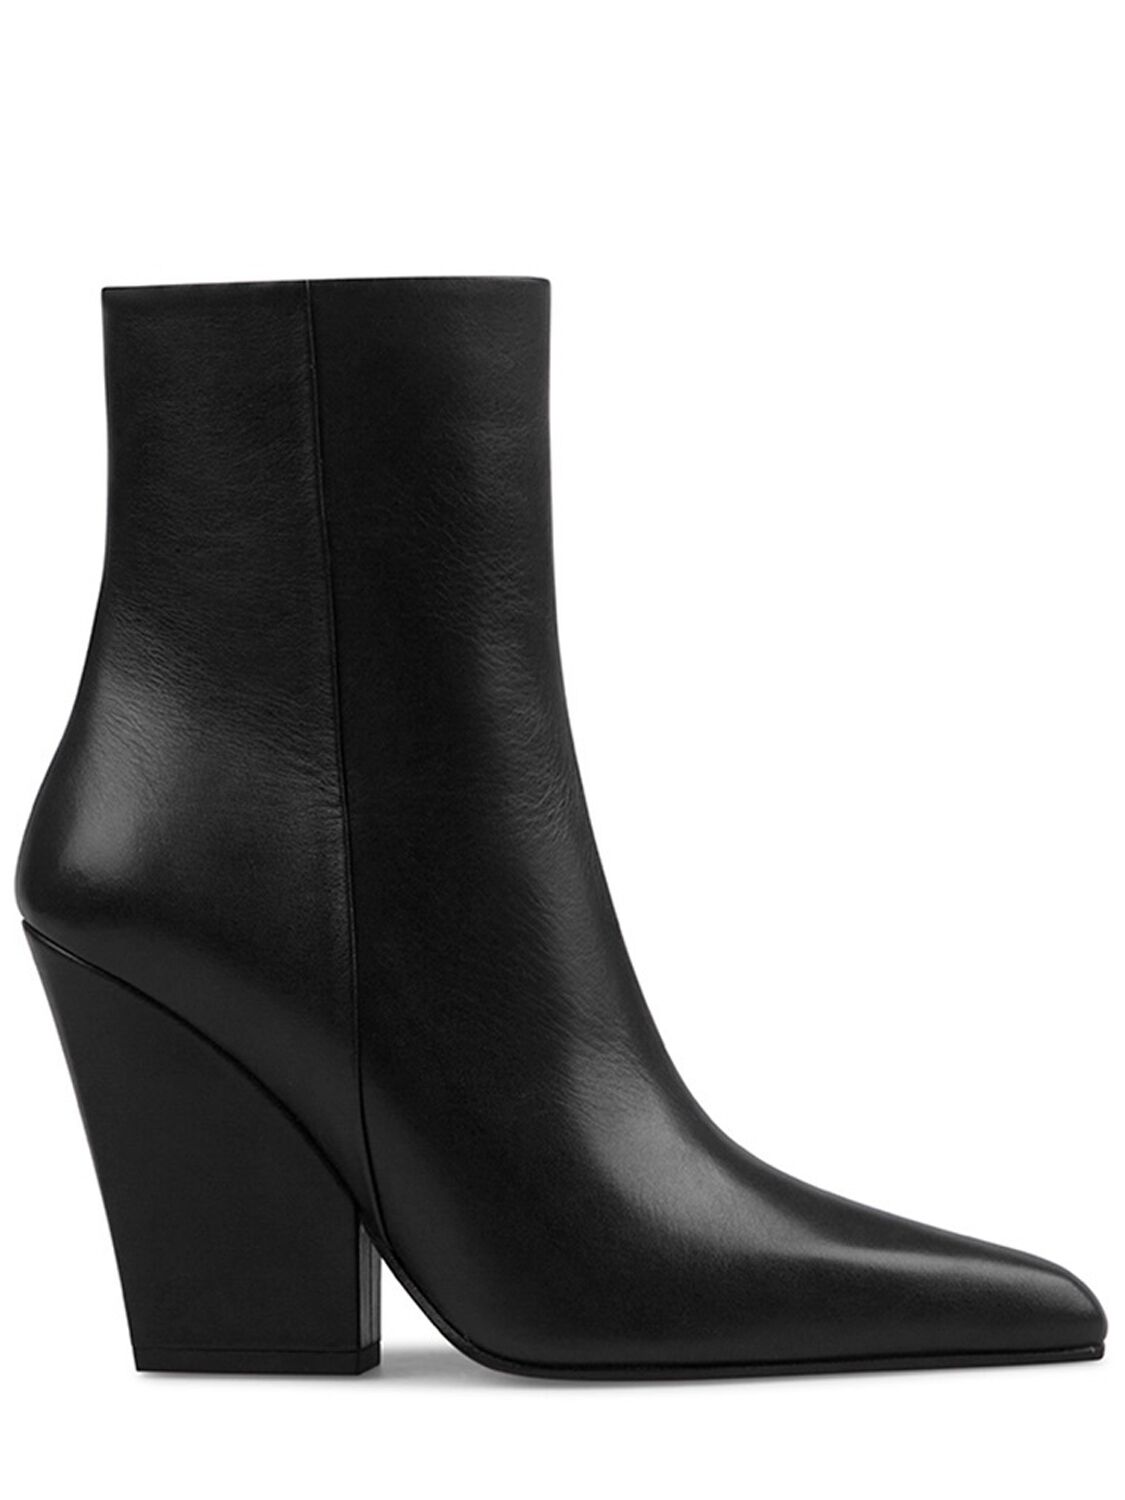 Paris Texas 100mm Jane Leather Ankle Boots In Black